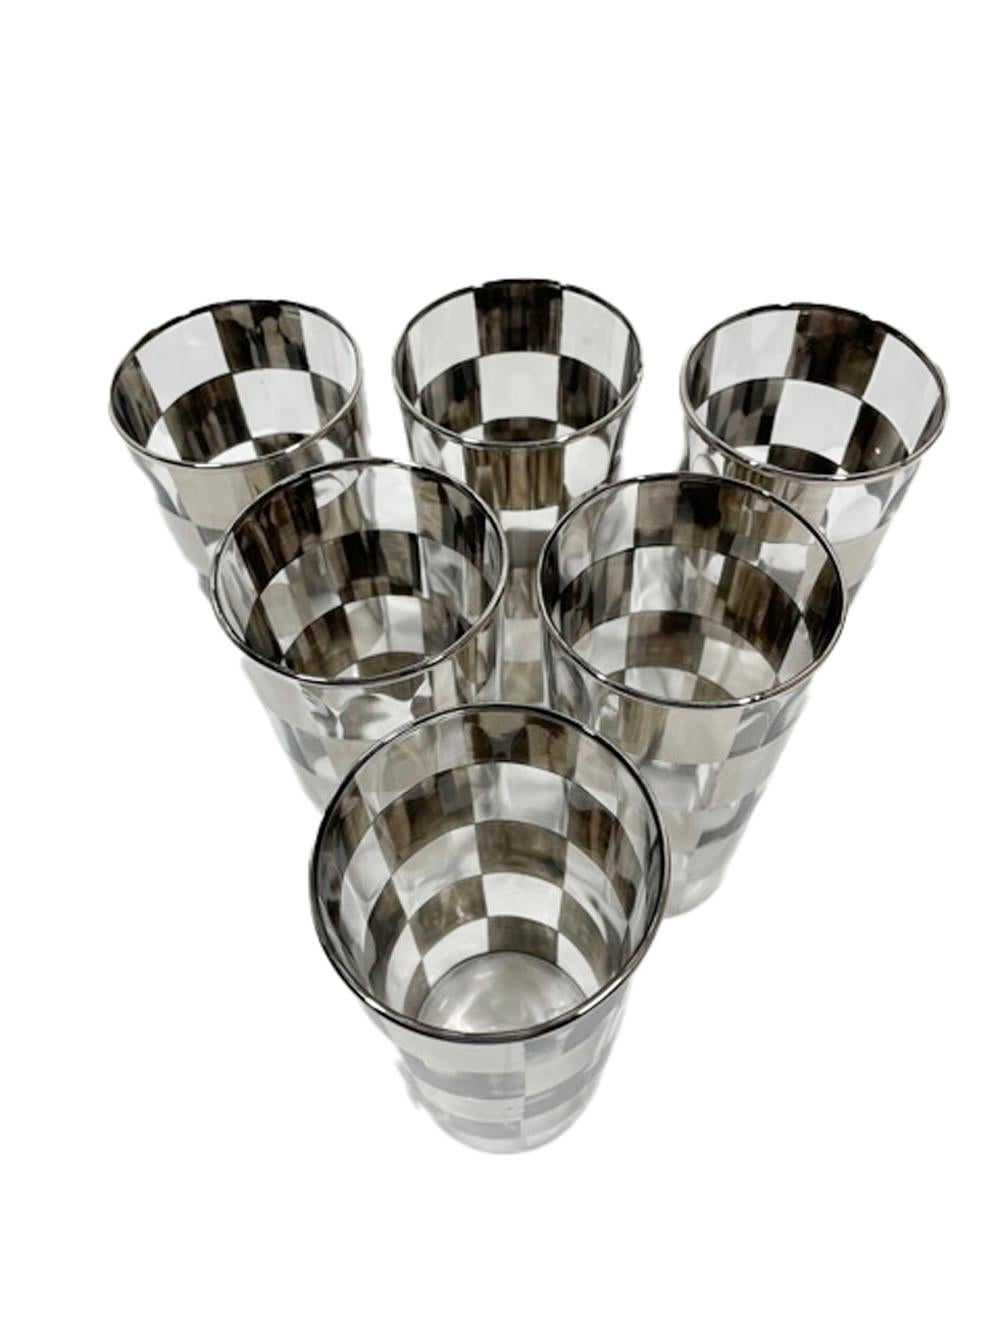 American Art Deco Cocktail Set with Silver Check Pattern on Ribbed Optical Glass